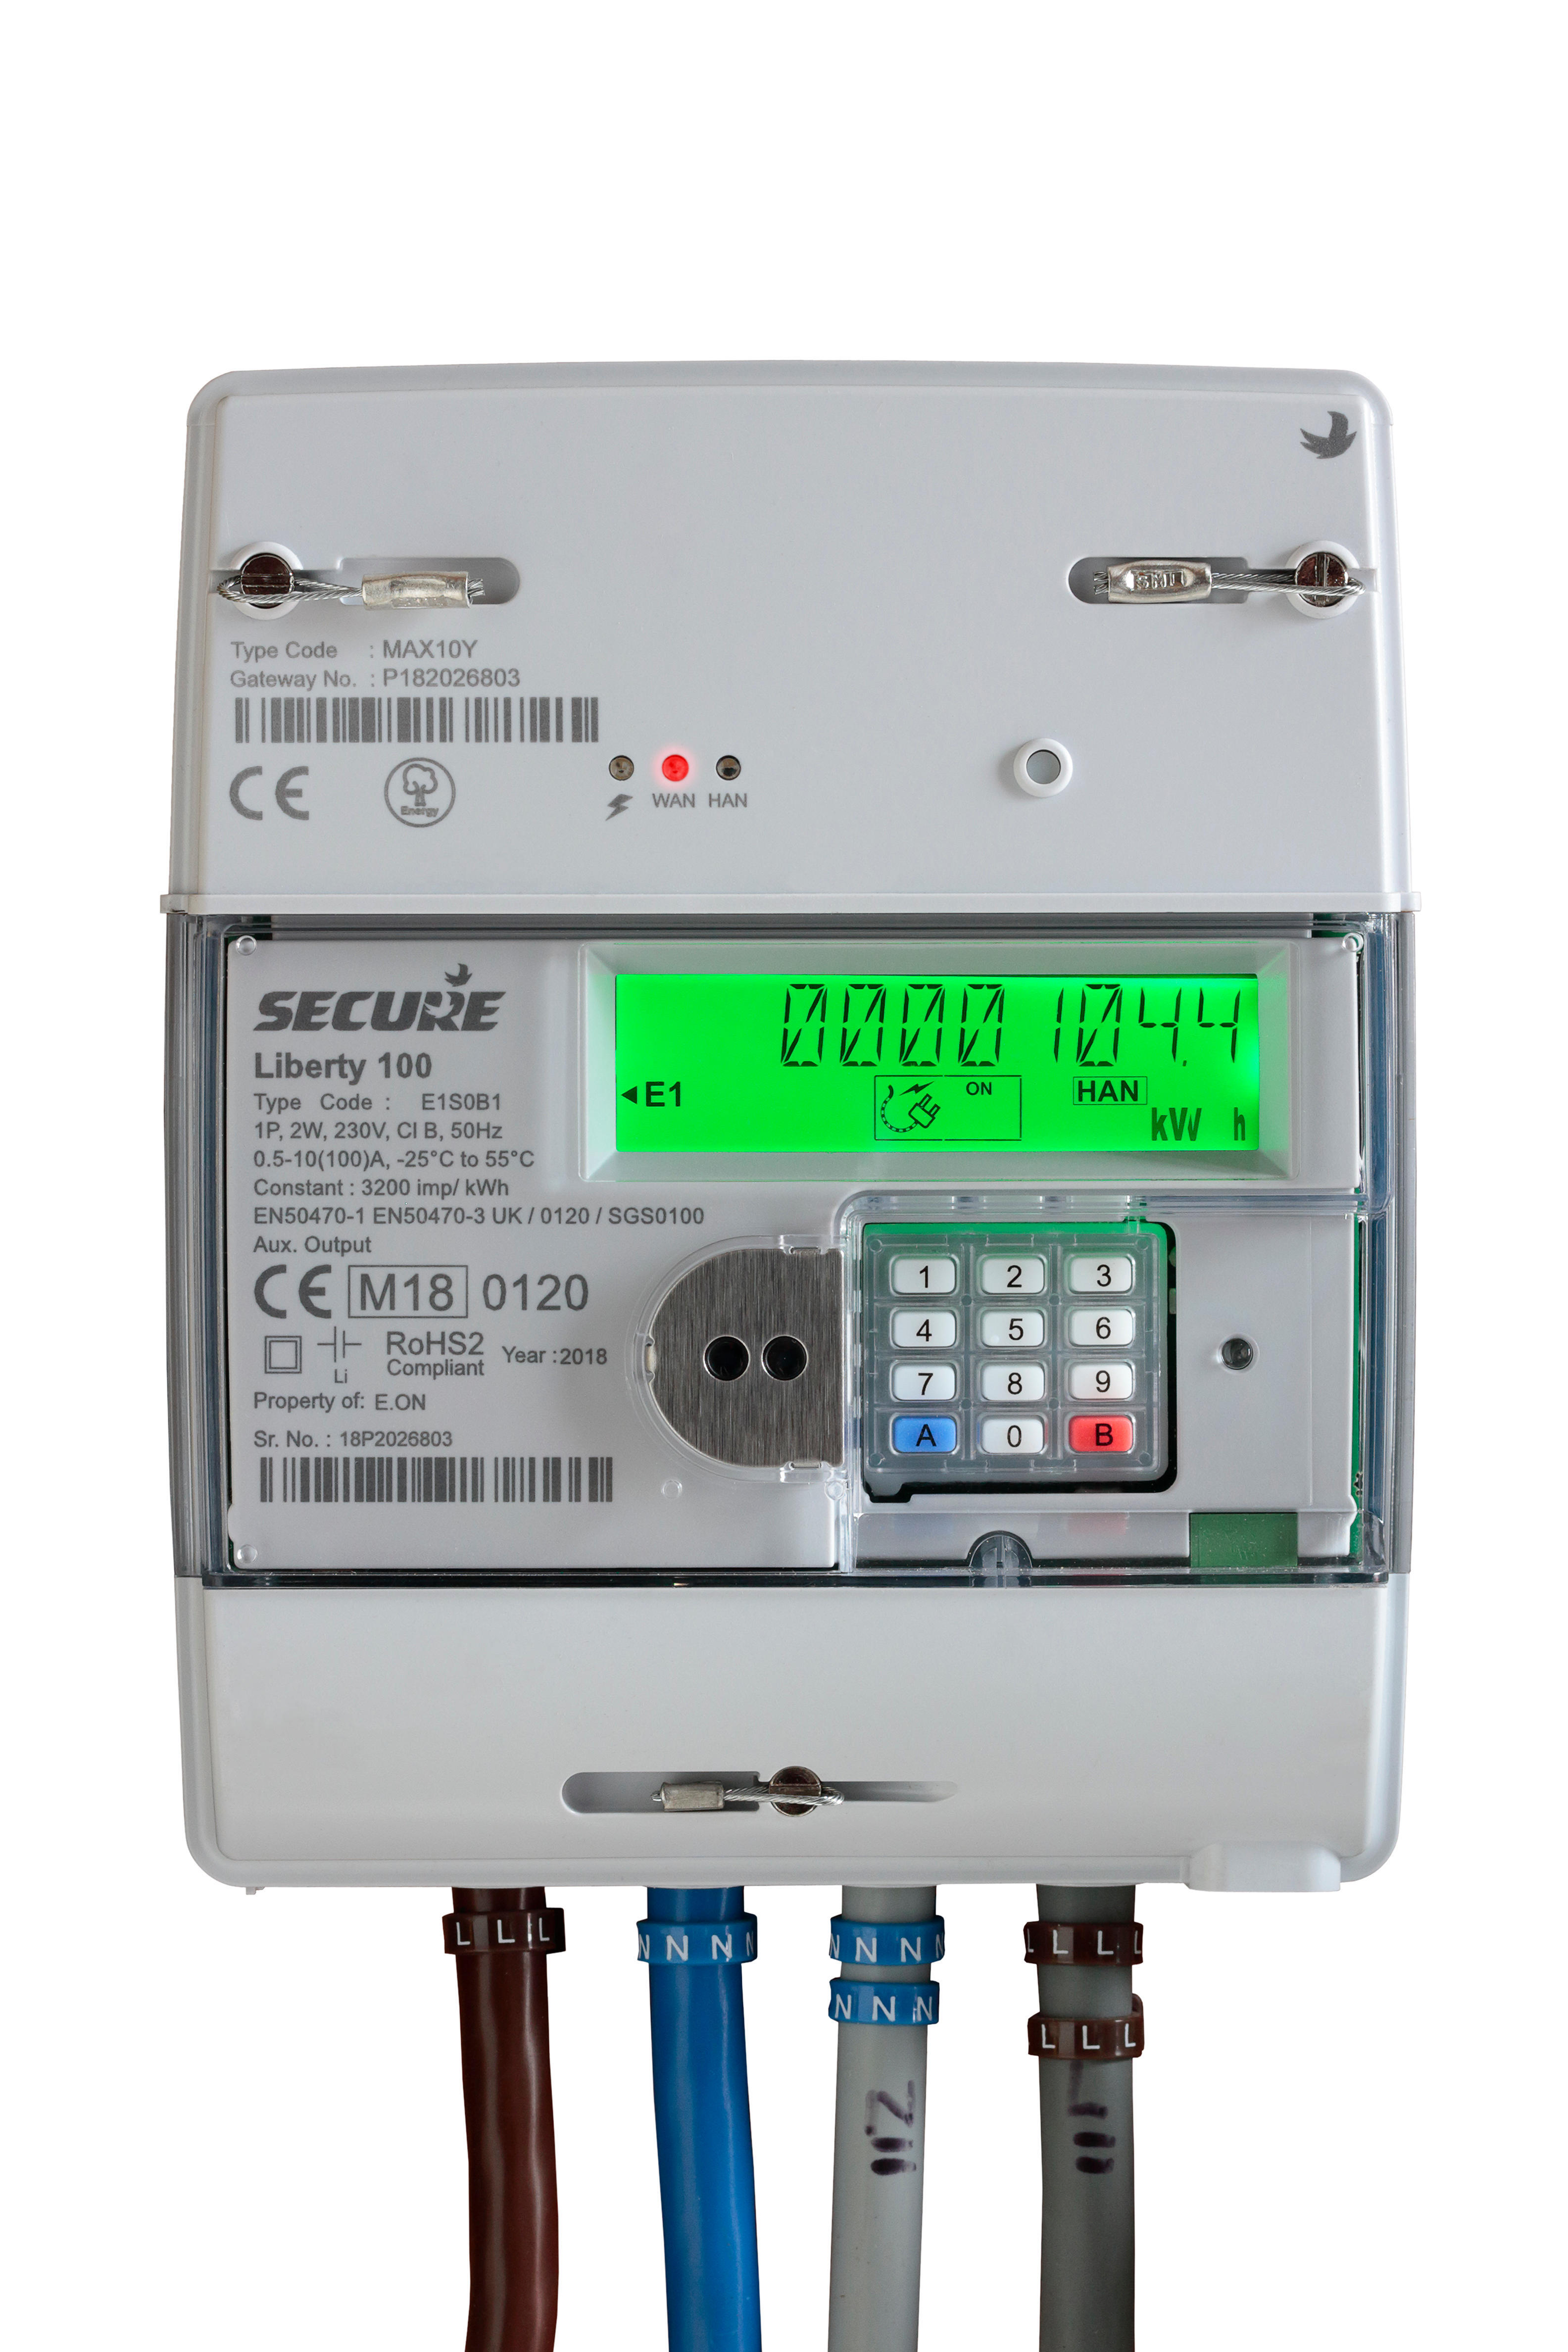 A digital electric meter with a MID marking on the left hand side. The MID mark is CE M18 0120.